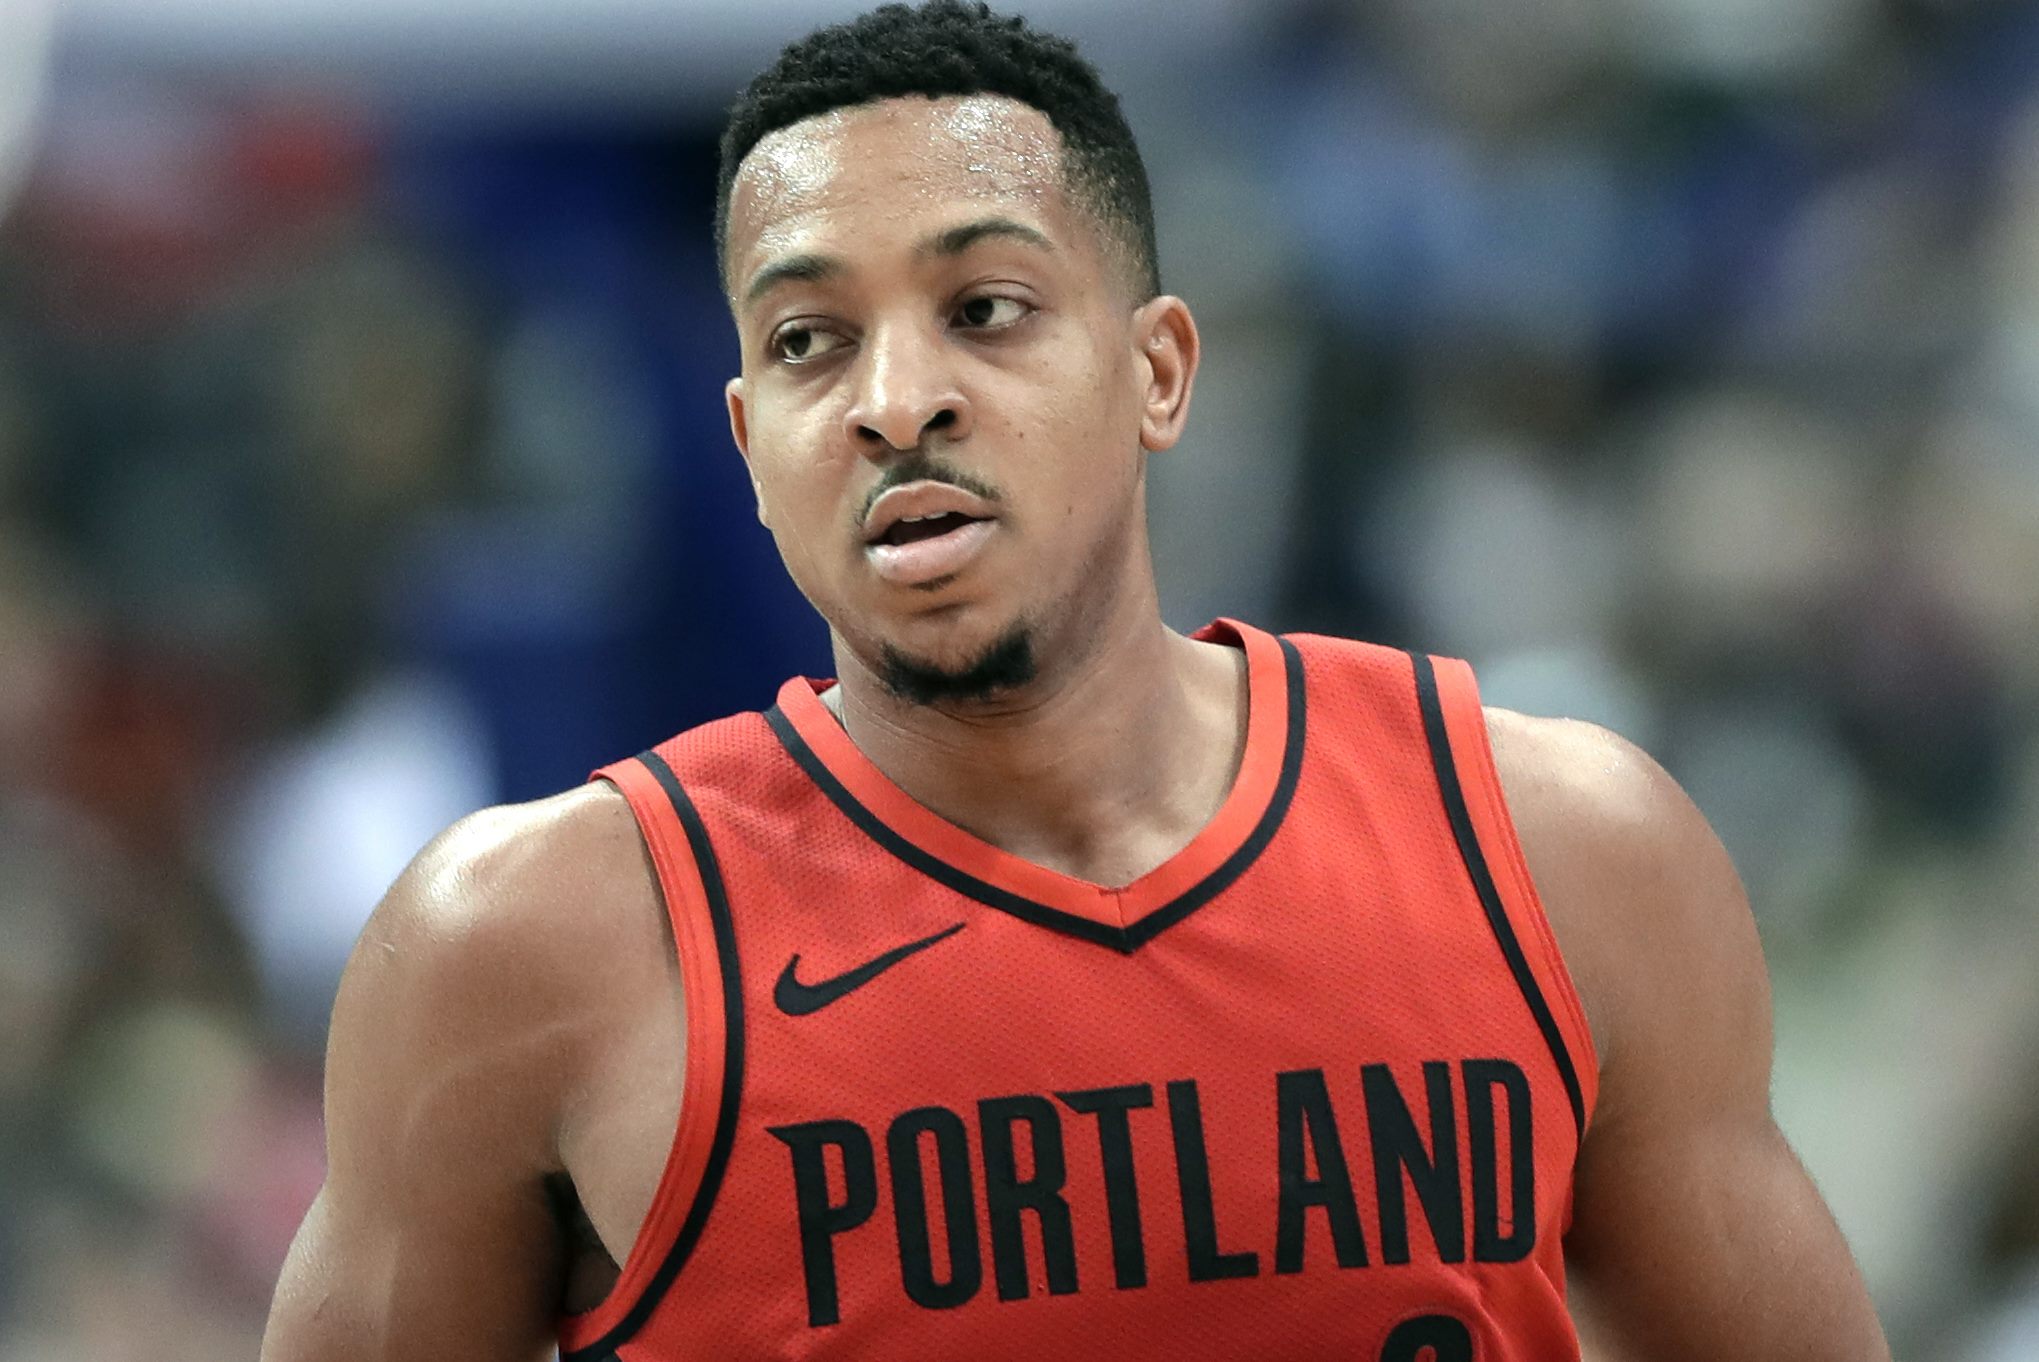 23 Extraordinary Facts About C.J. McCollum - Facts.net